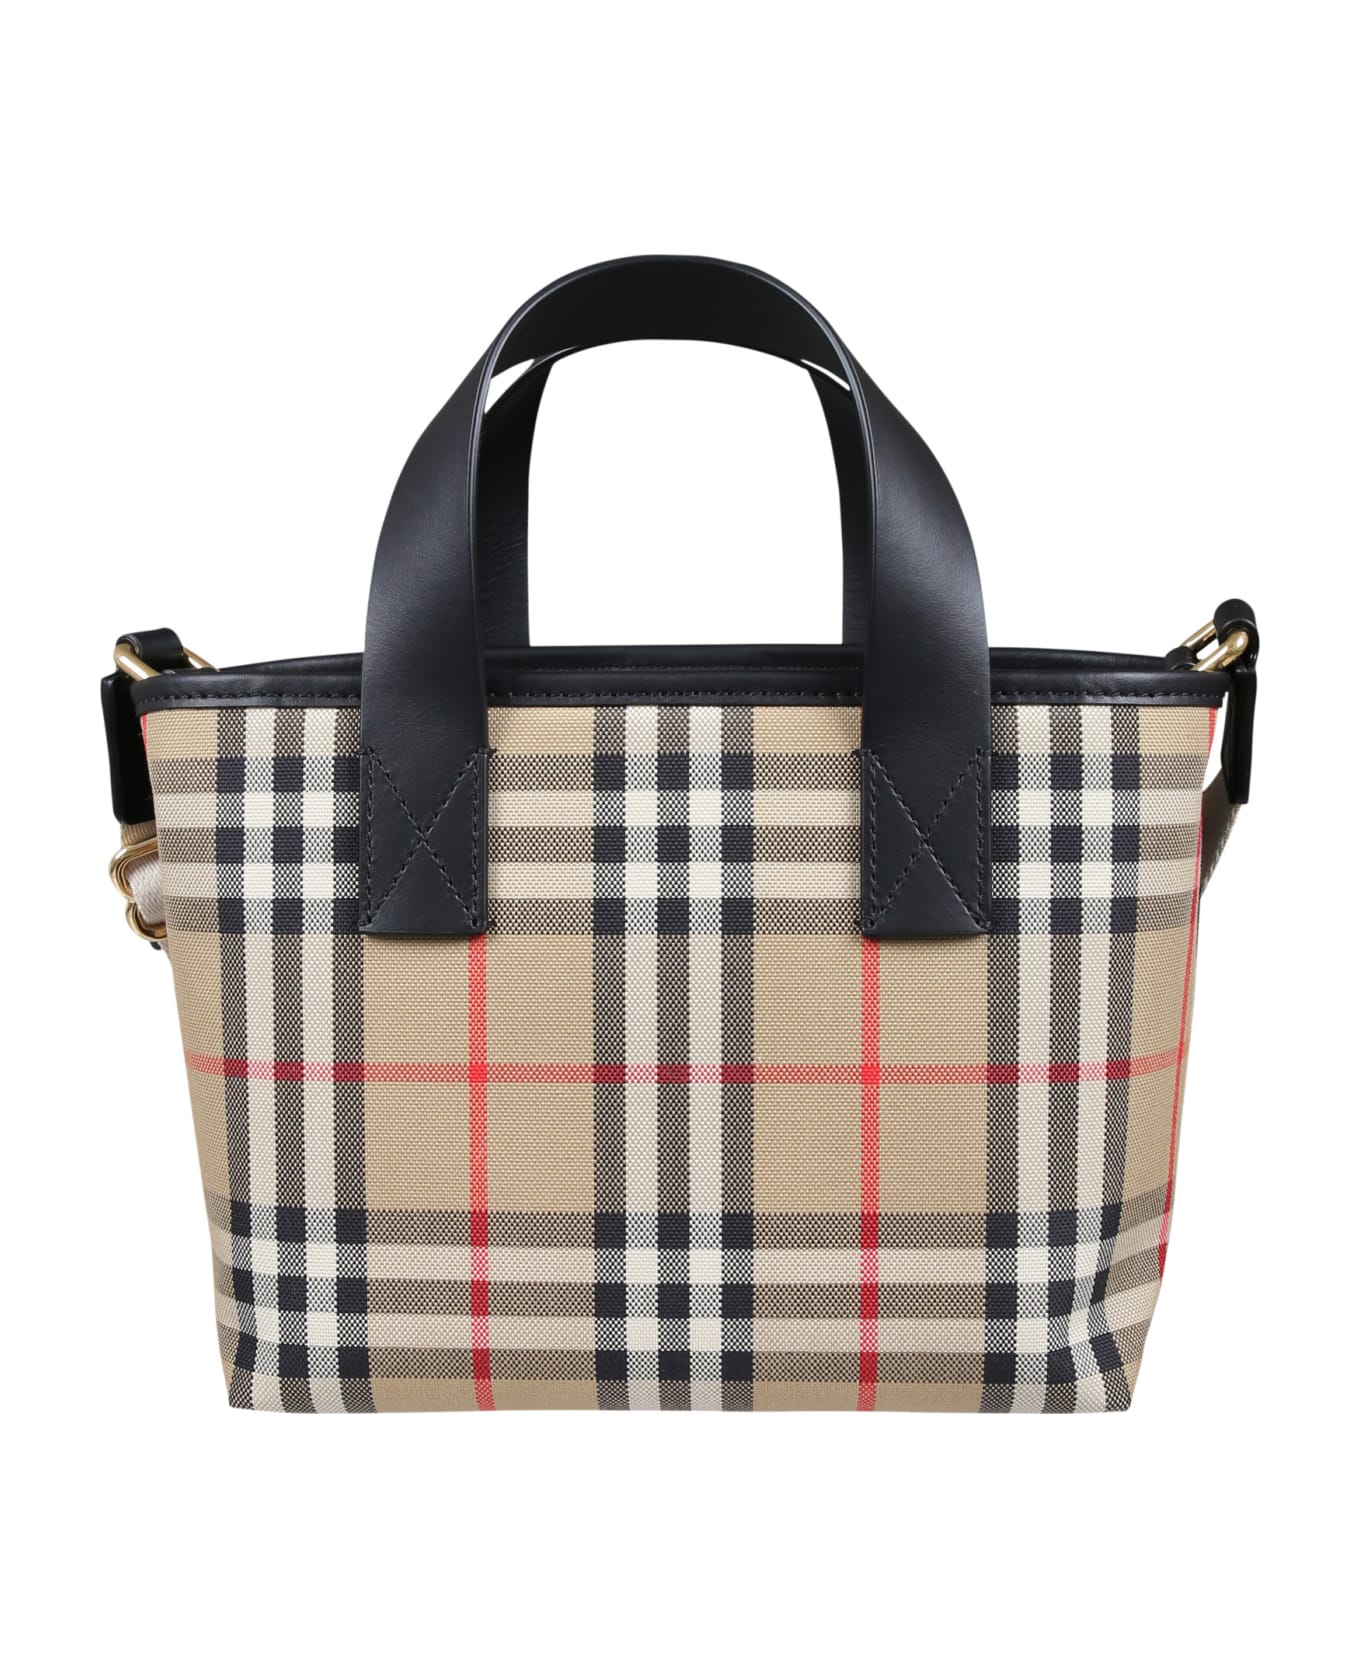 Burberry Beige Bag For Girl With Vintage Check - Beige